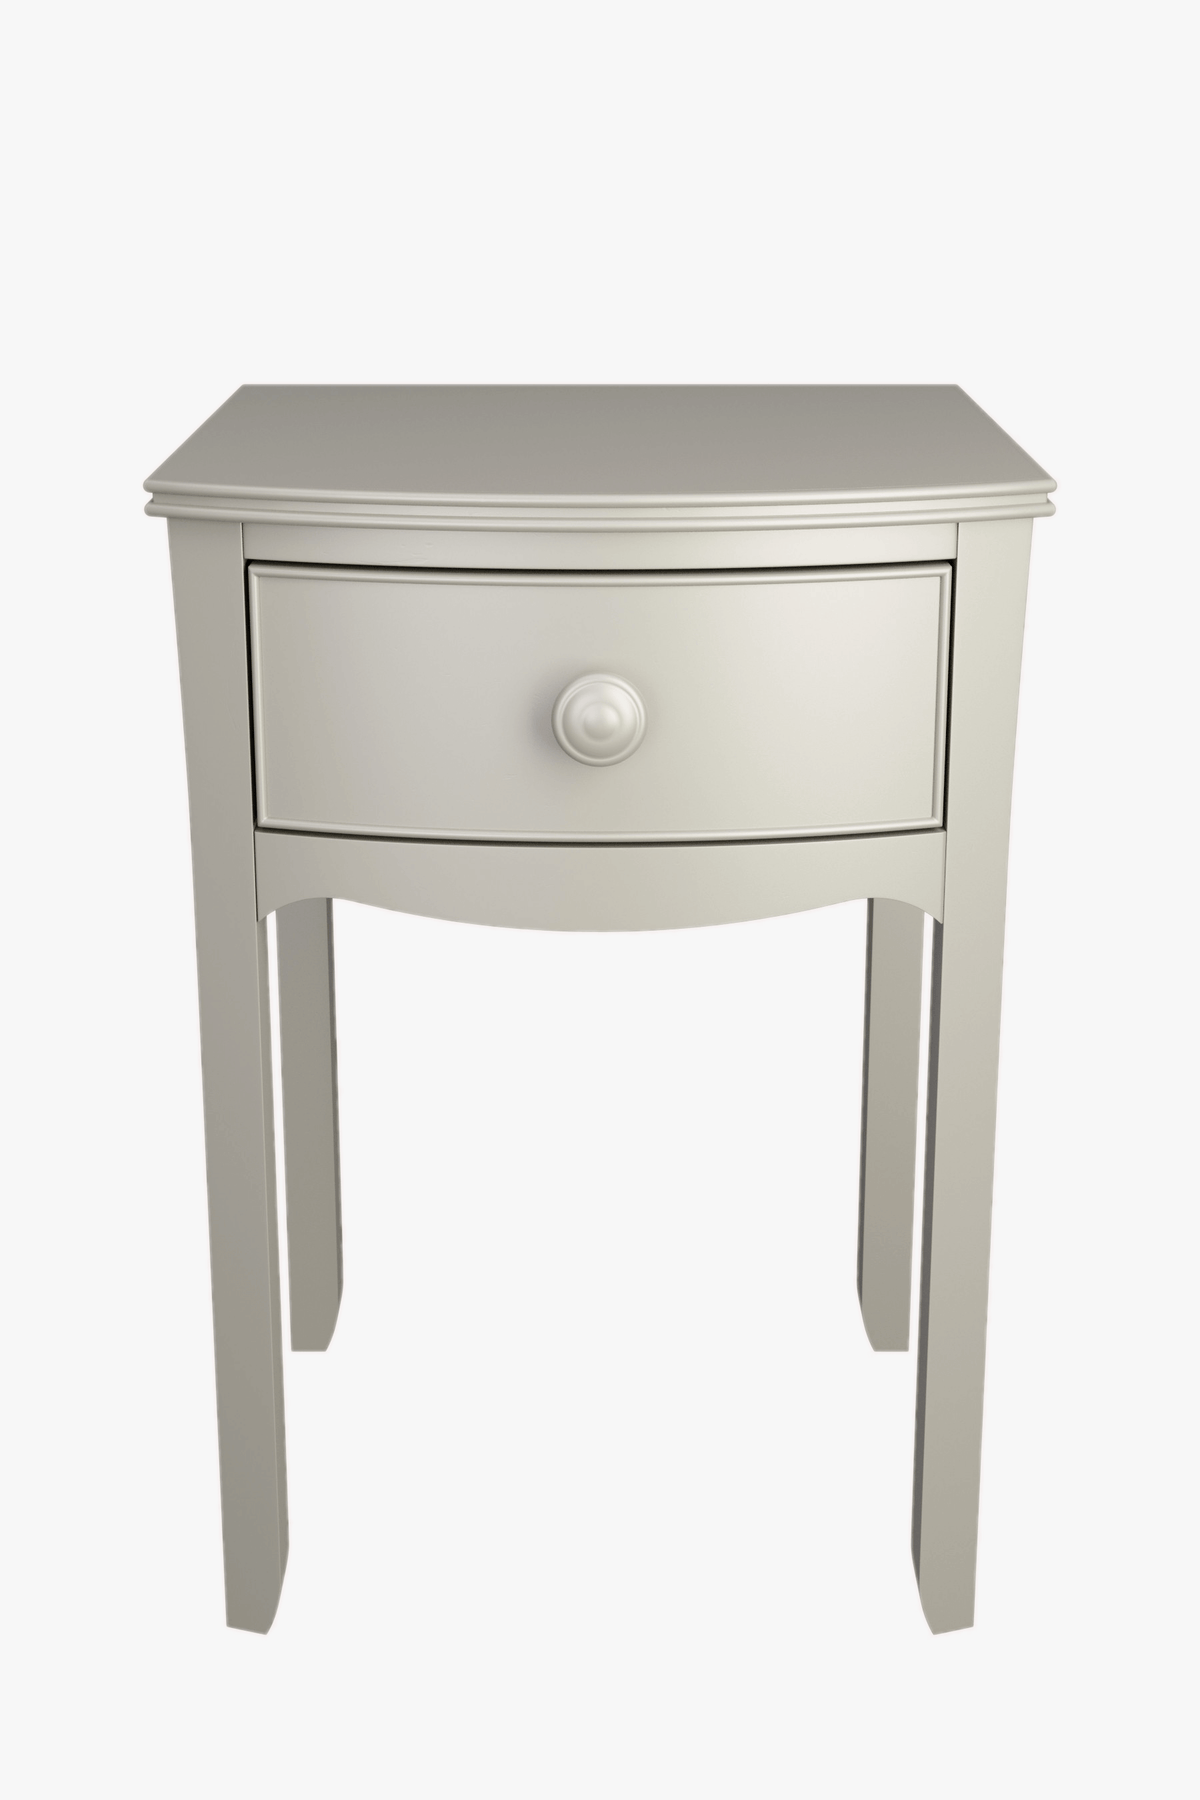 Broughton 1 Drawer Bedside Table